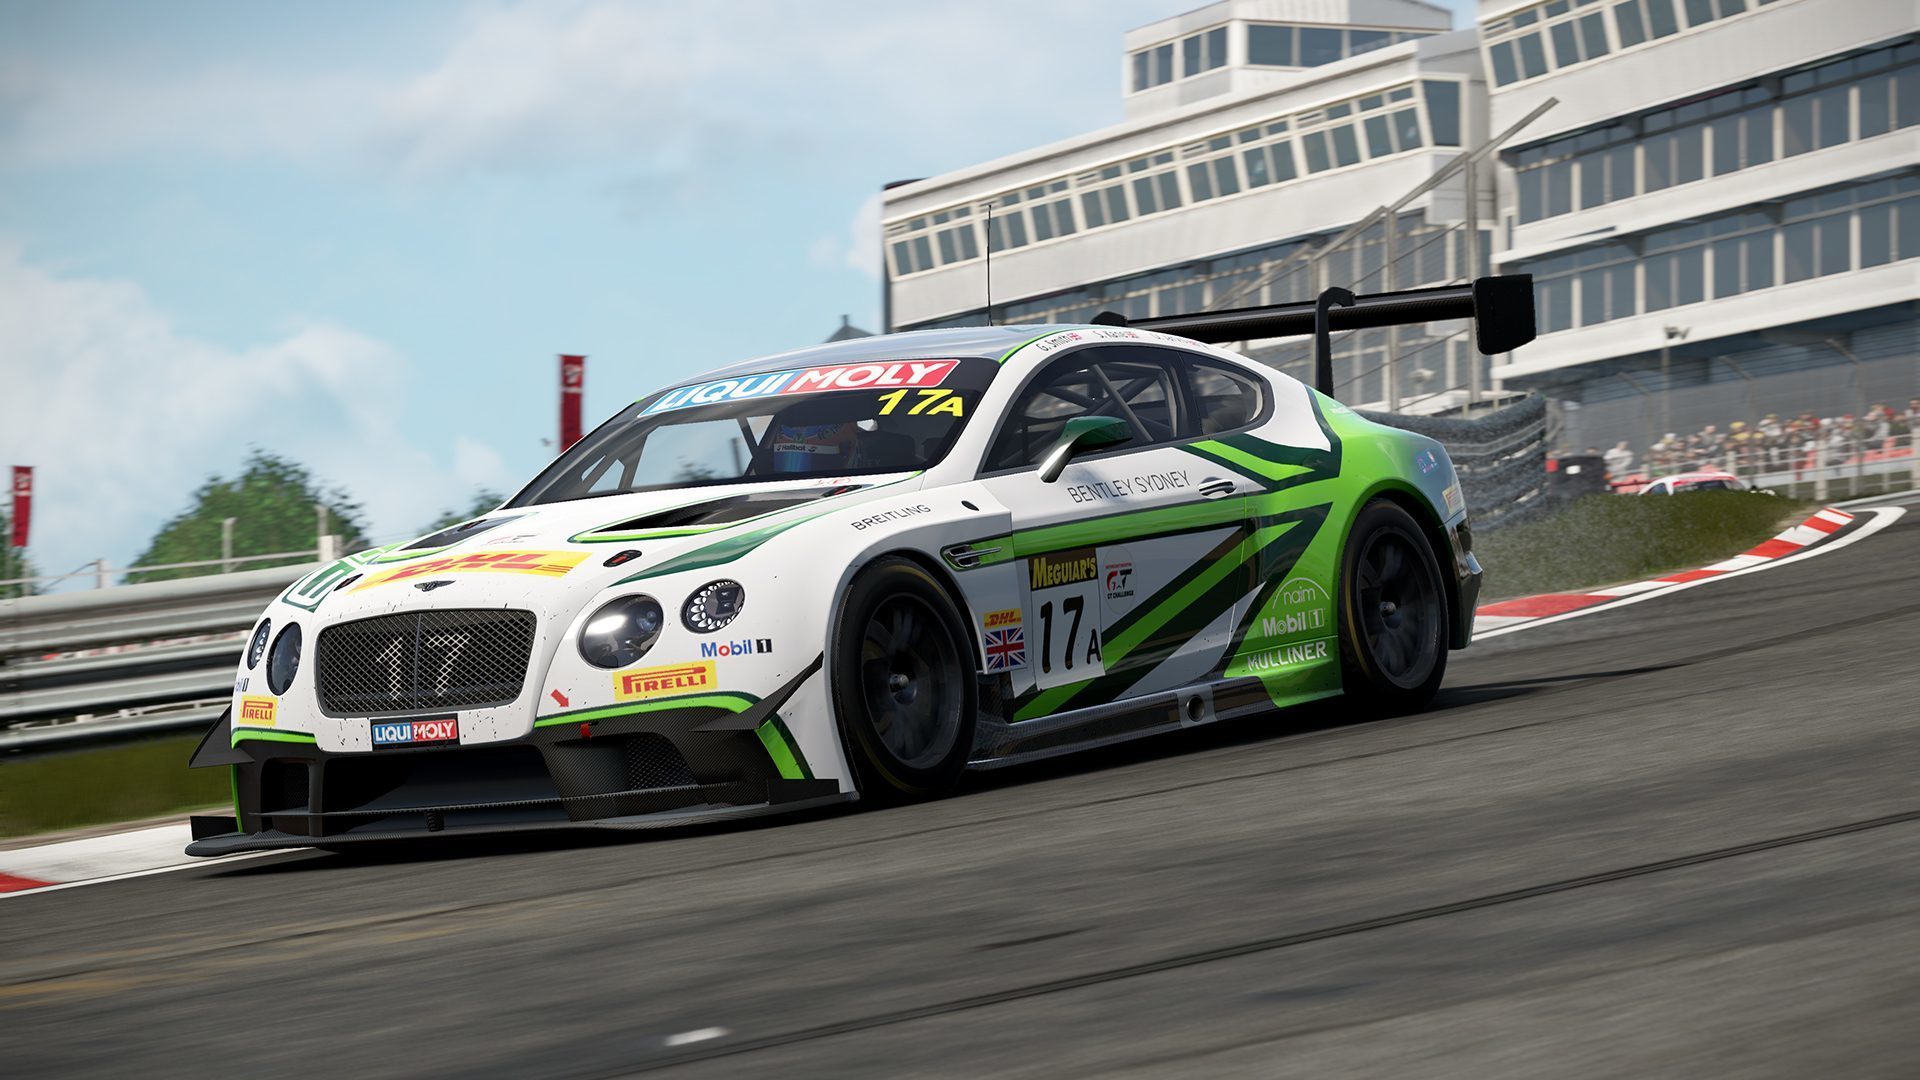 The Always Up To Date Project CARS 2 Car List